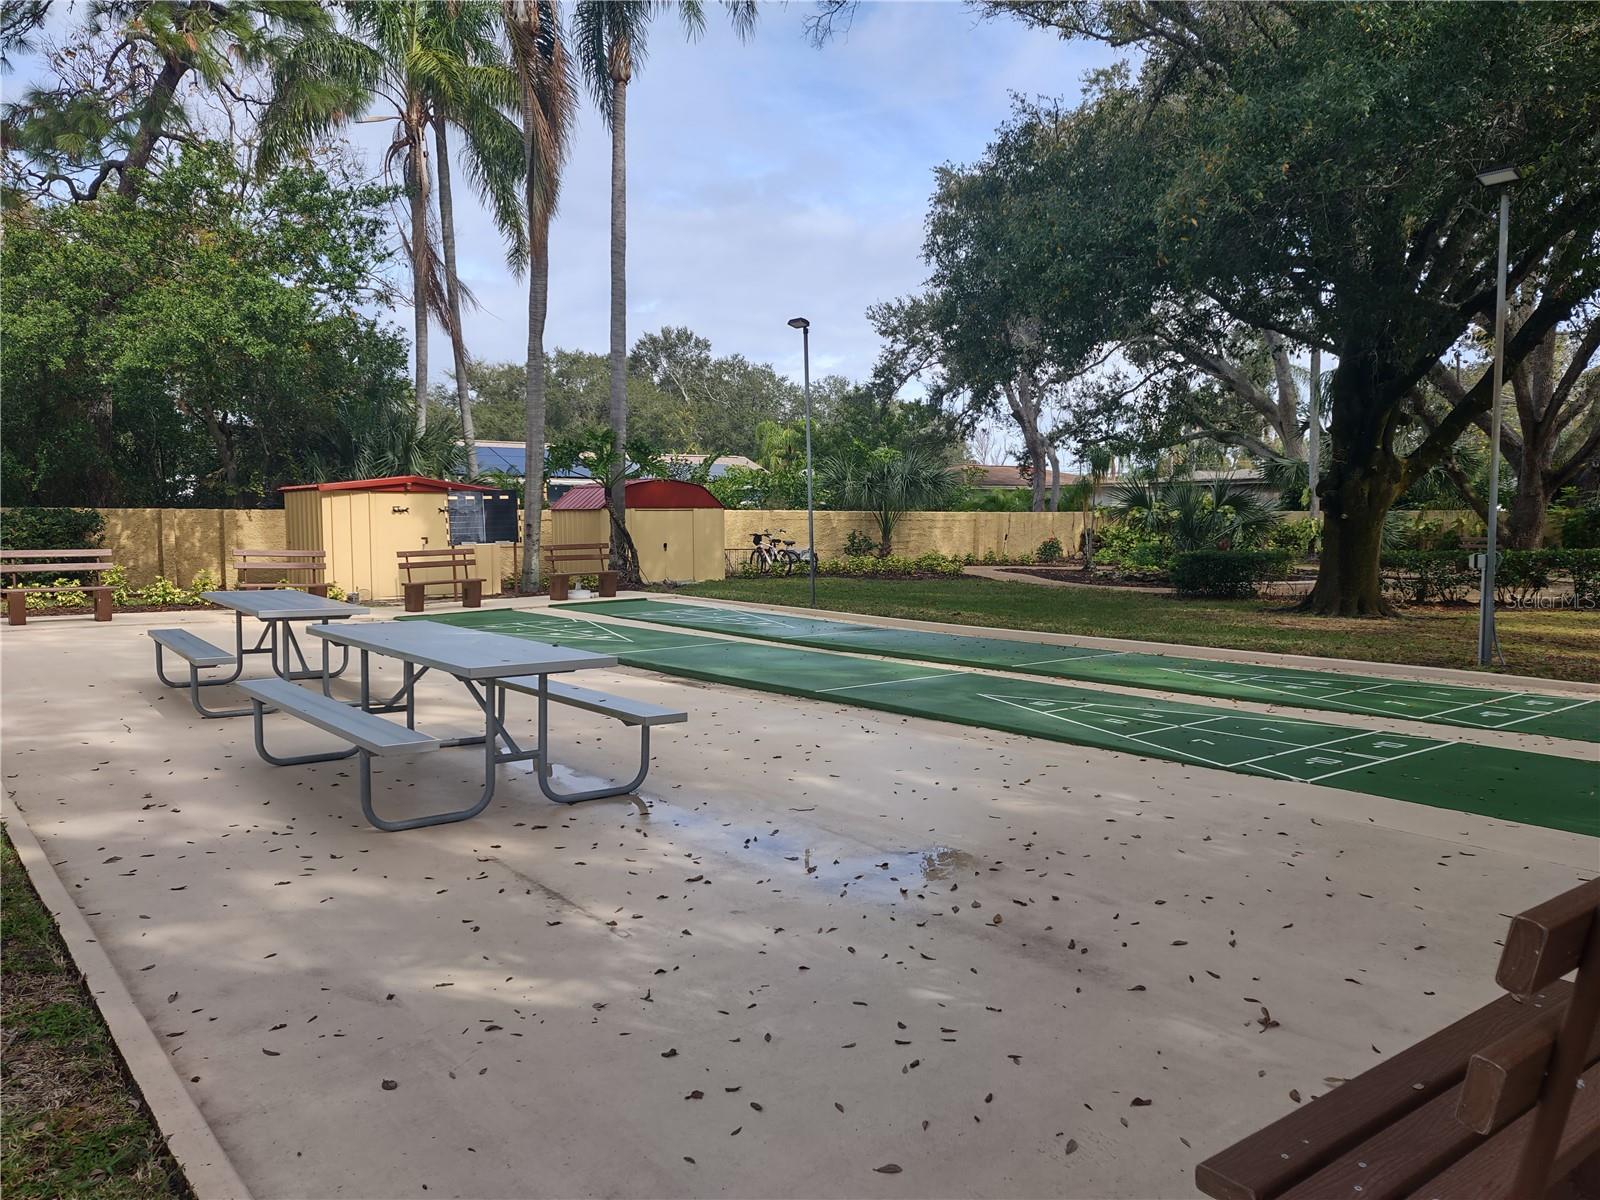 Shuffleboarad Courts with picnic tables and umbrellas.  Shed houses grills for resident use.  Bike storage is in upper righthand corner